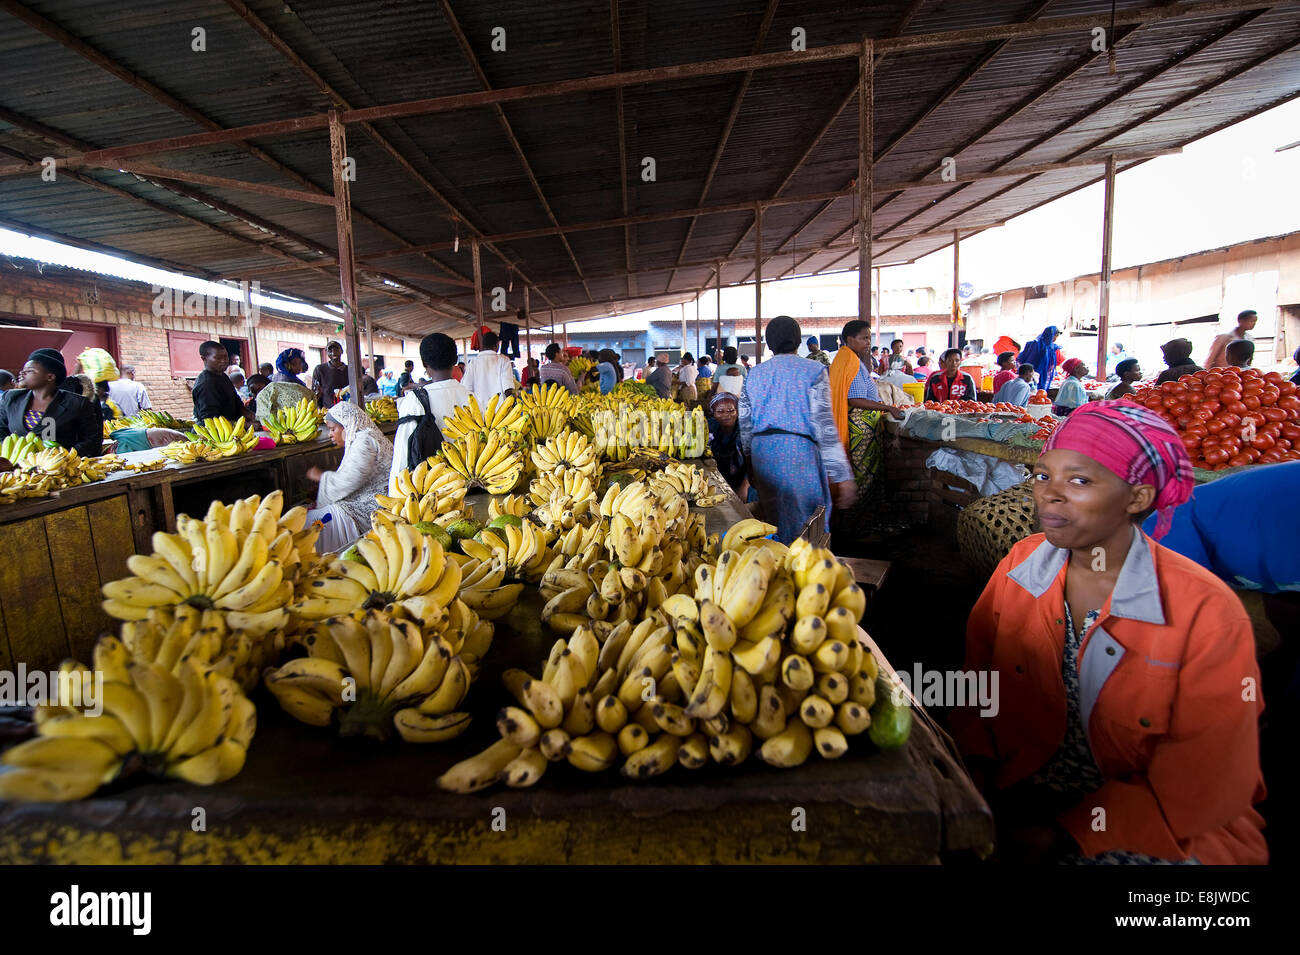 RWANDA, KIGALI: A big market in the capital offers everything: food, clothes, kitchen equipment, herbal medicine. Stock Photo